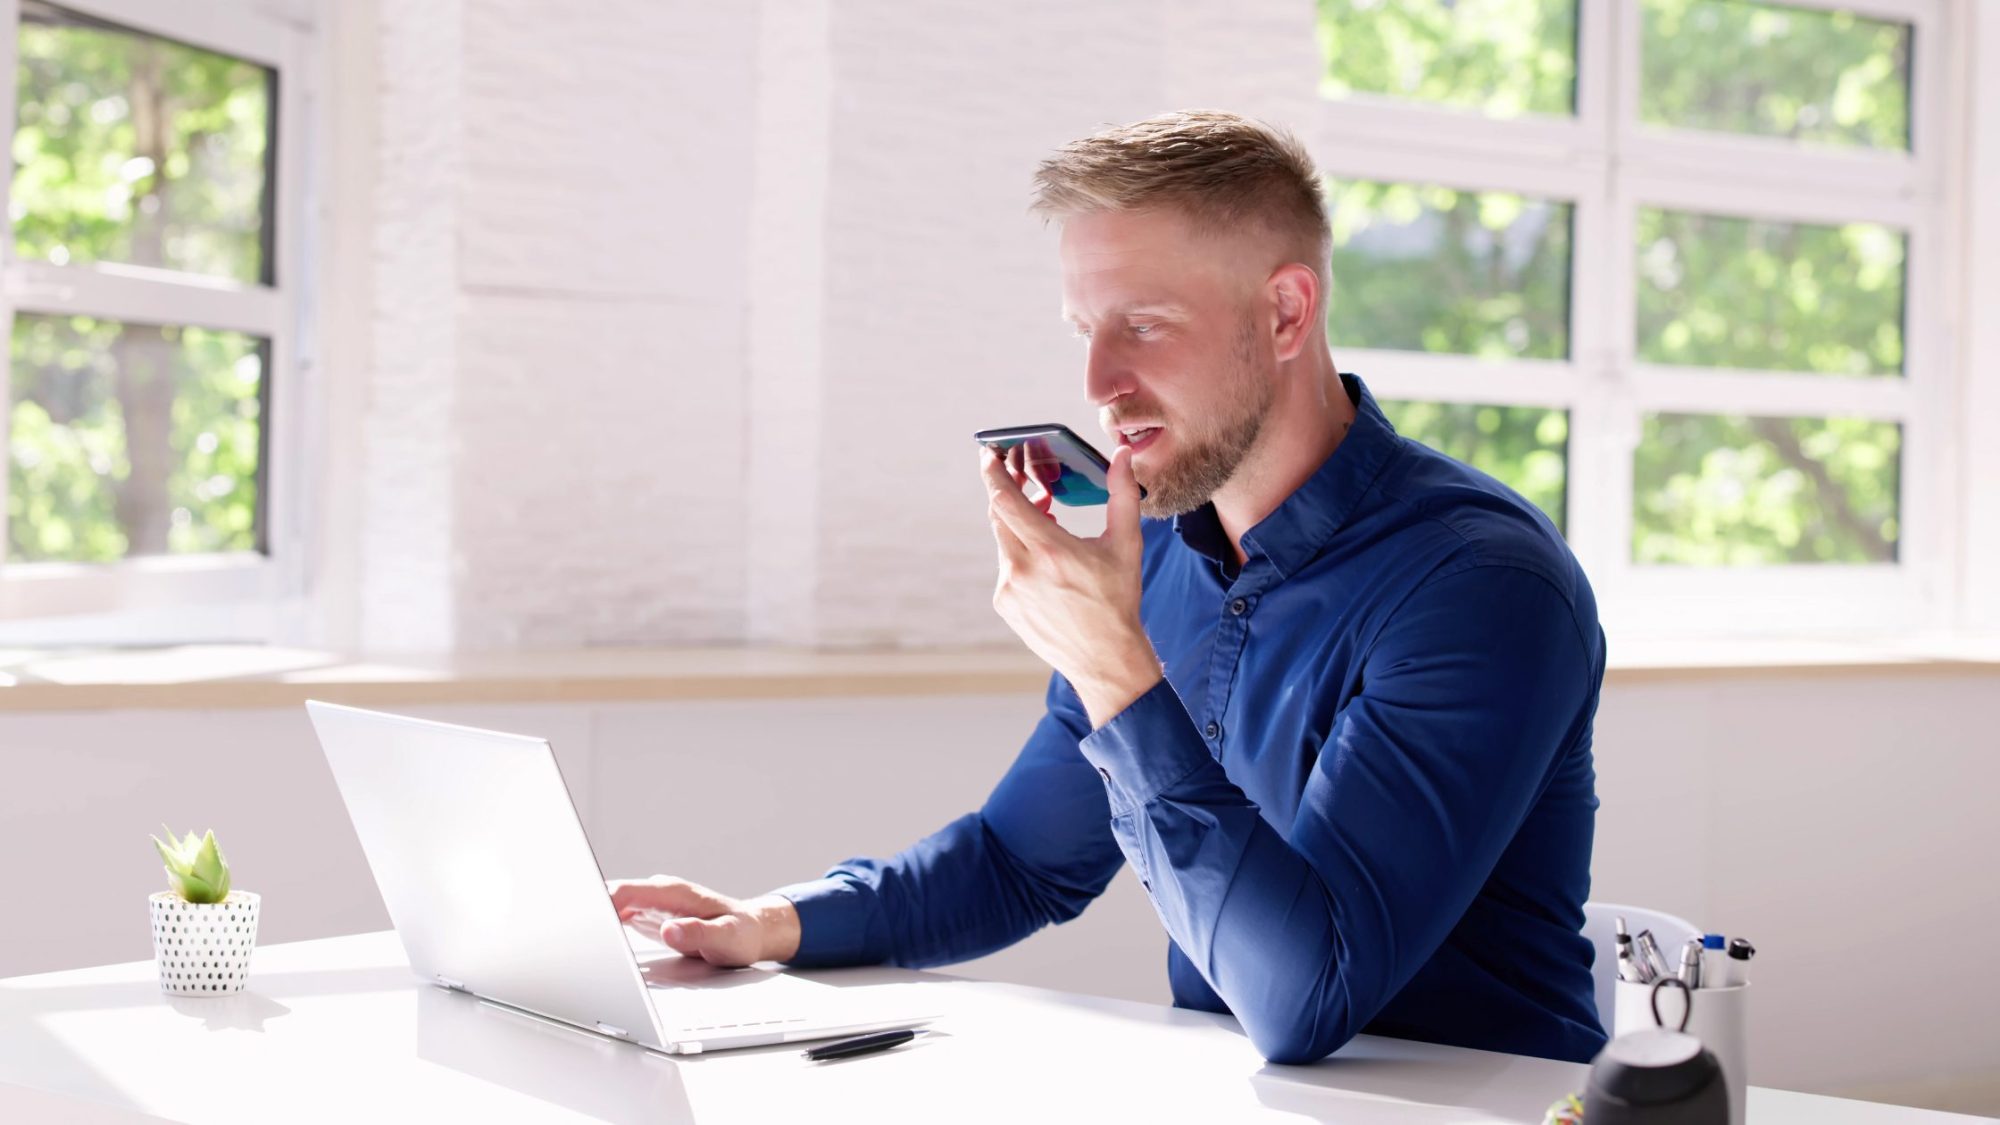 A man with short blonde hair and a beard wearing a blue button-up shirt is using his laptop while speaking into his smartphone. 